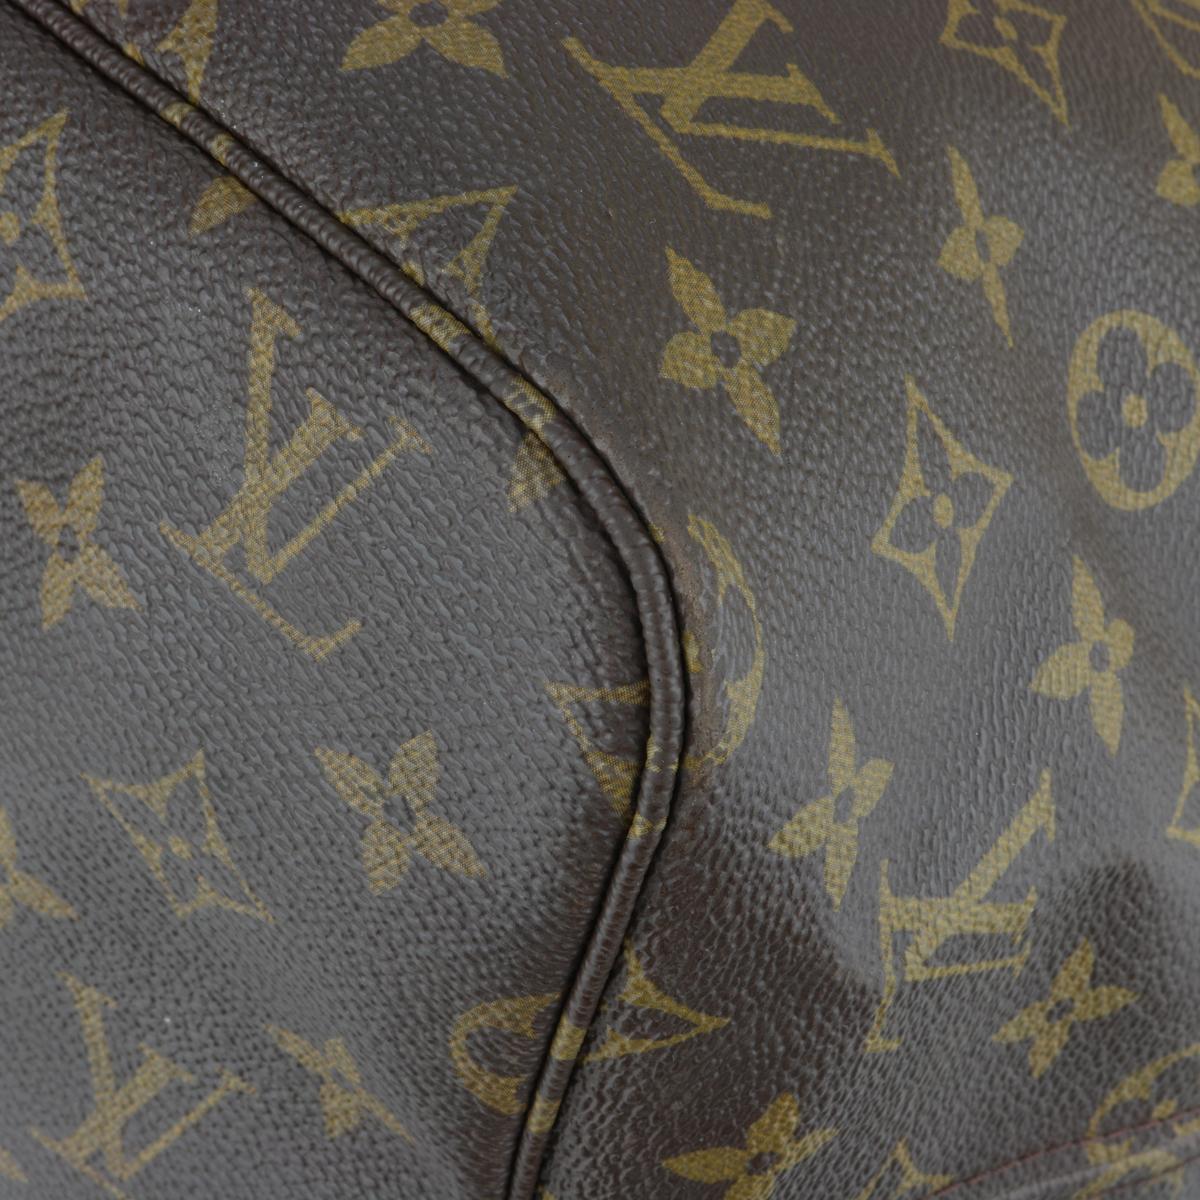 Louis Vuitton Neverfull GM Bag in Monogram with Beige Interior 2008 5